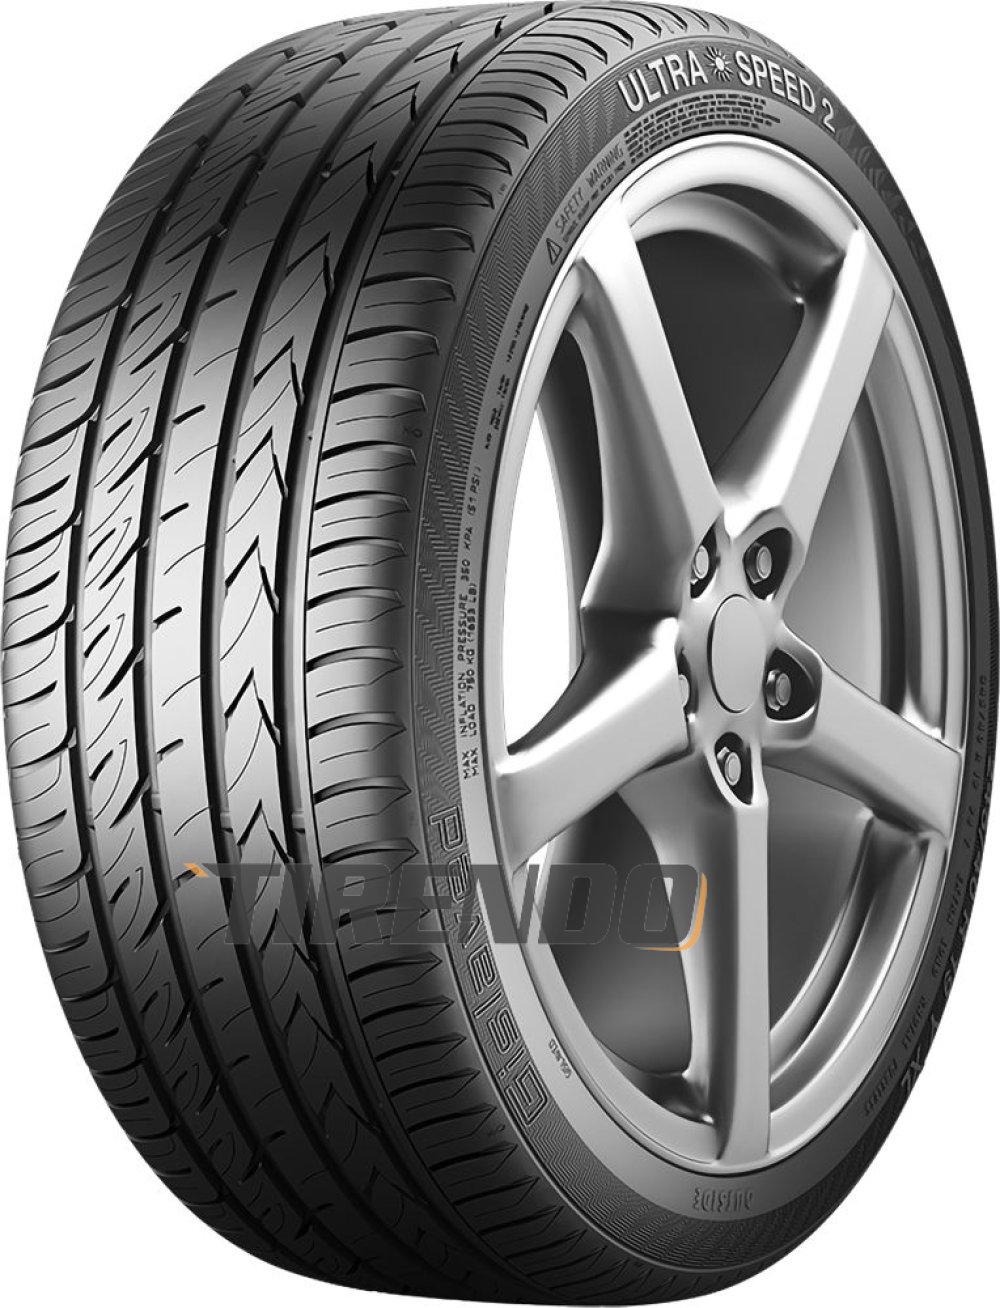 Image of Gislaved Ultra*Speed 2 ( 195/65 R15 95T XL EVc )